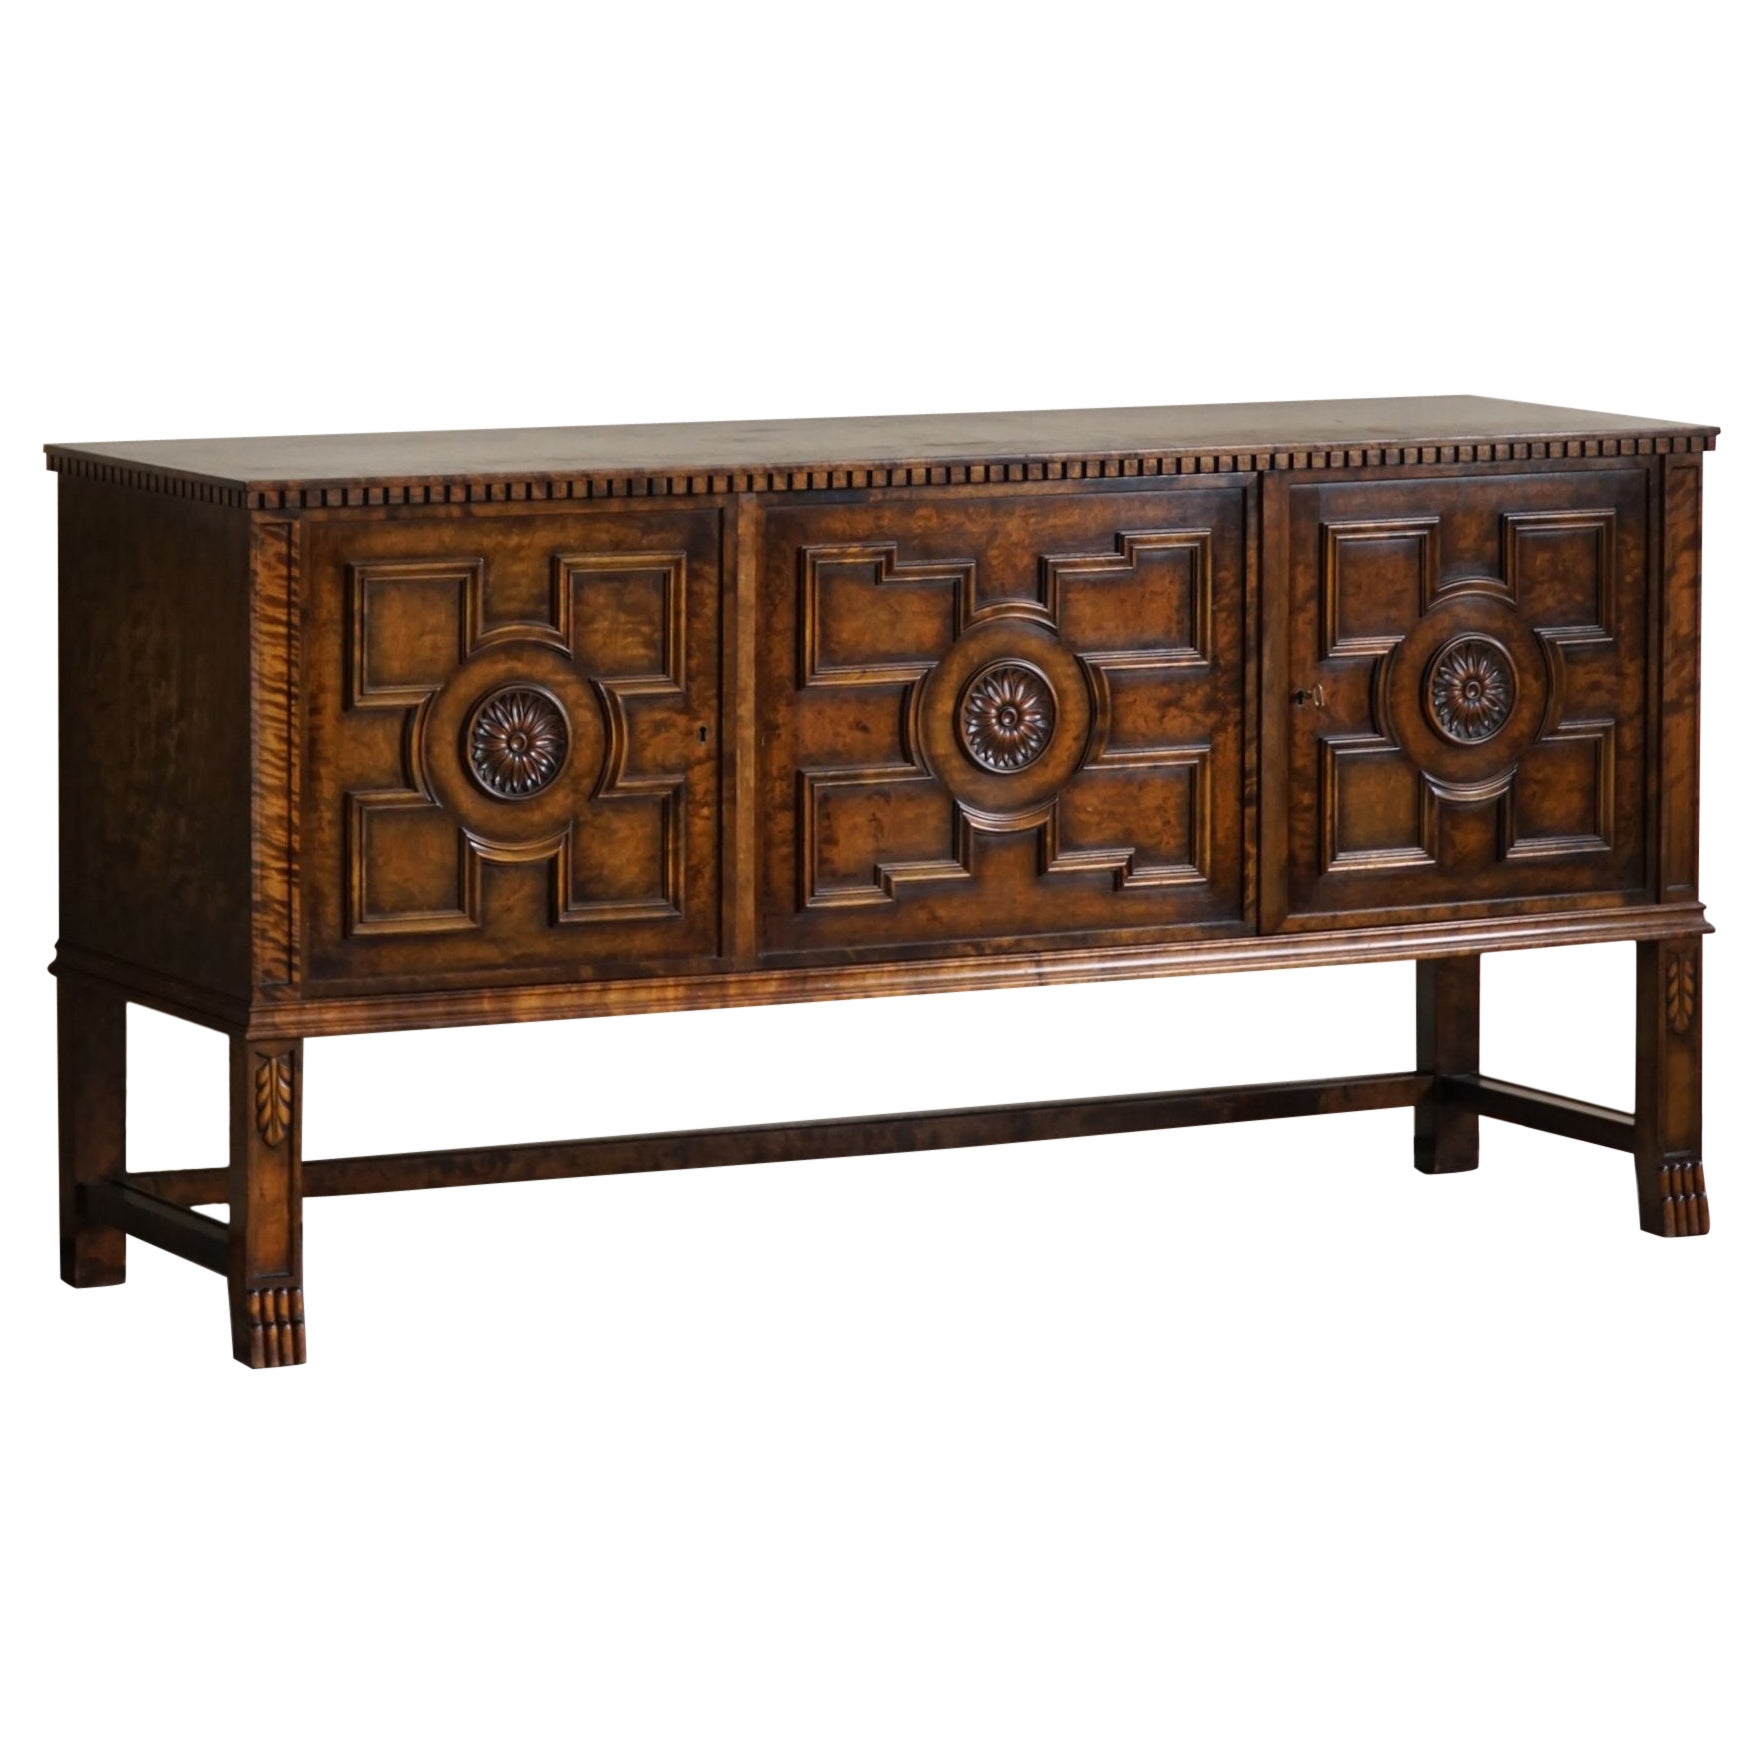 Axel Einar Hjorth, Art Deco Sideboard, Model "Roma" Made by Bodafors, 1920s For Sale